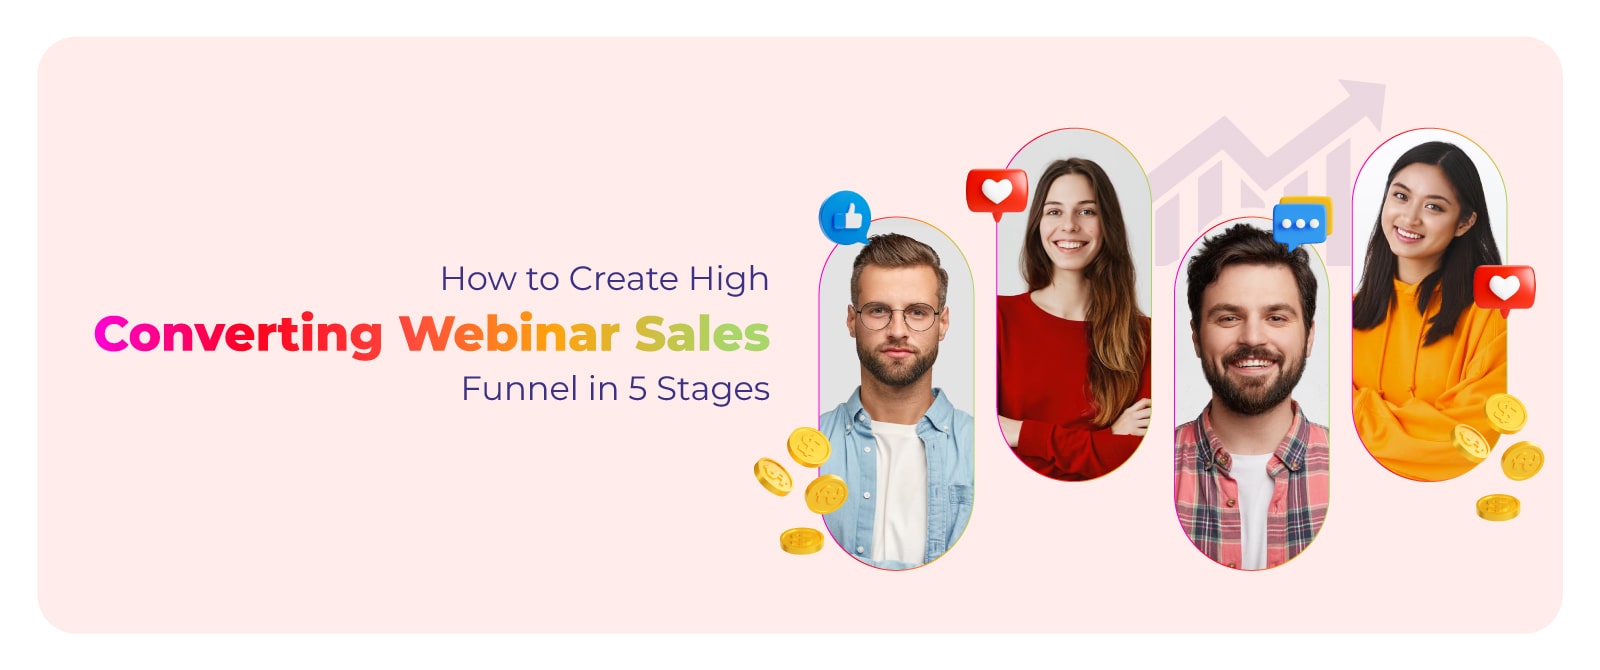 How to Create High Converting Webinar Sales Funnel in 5 Stages